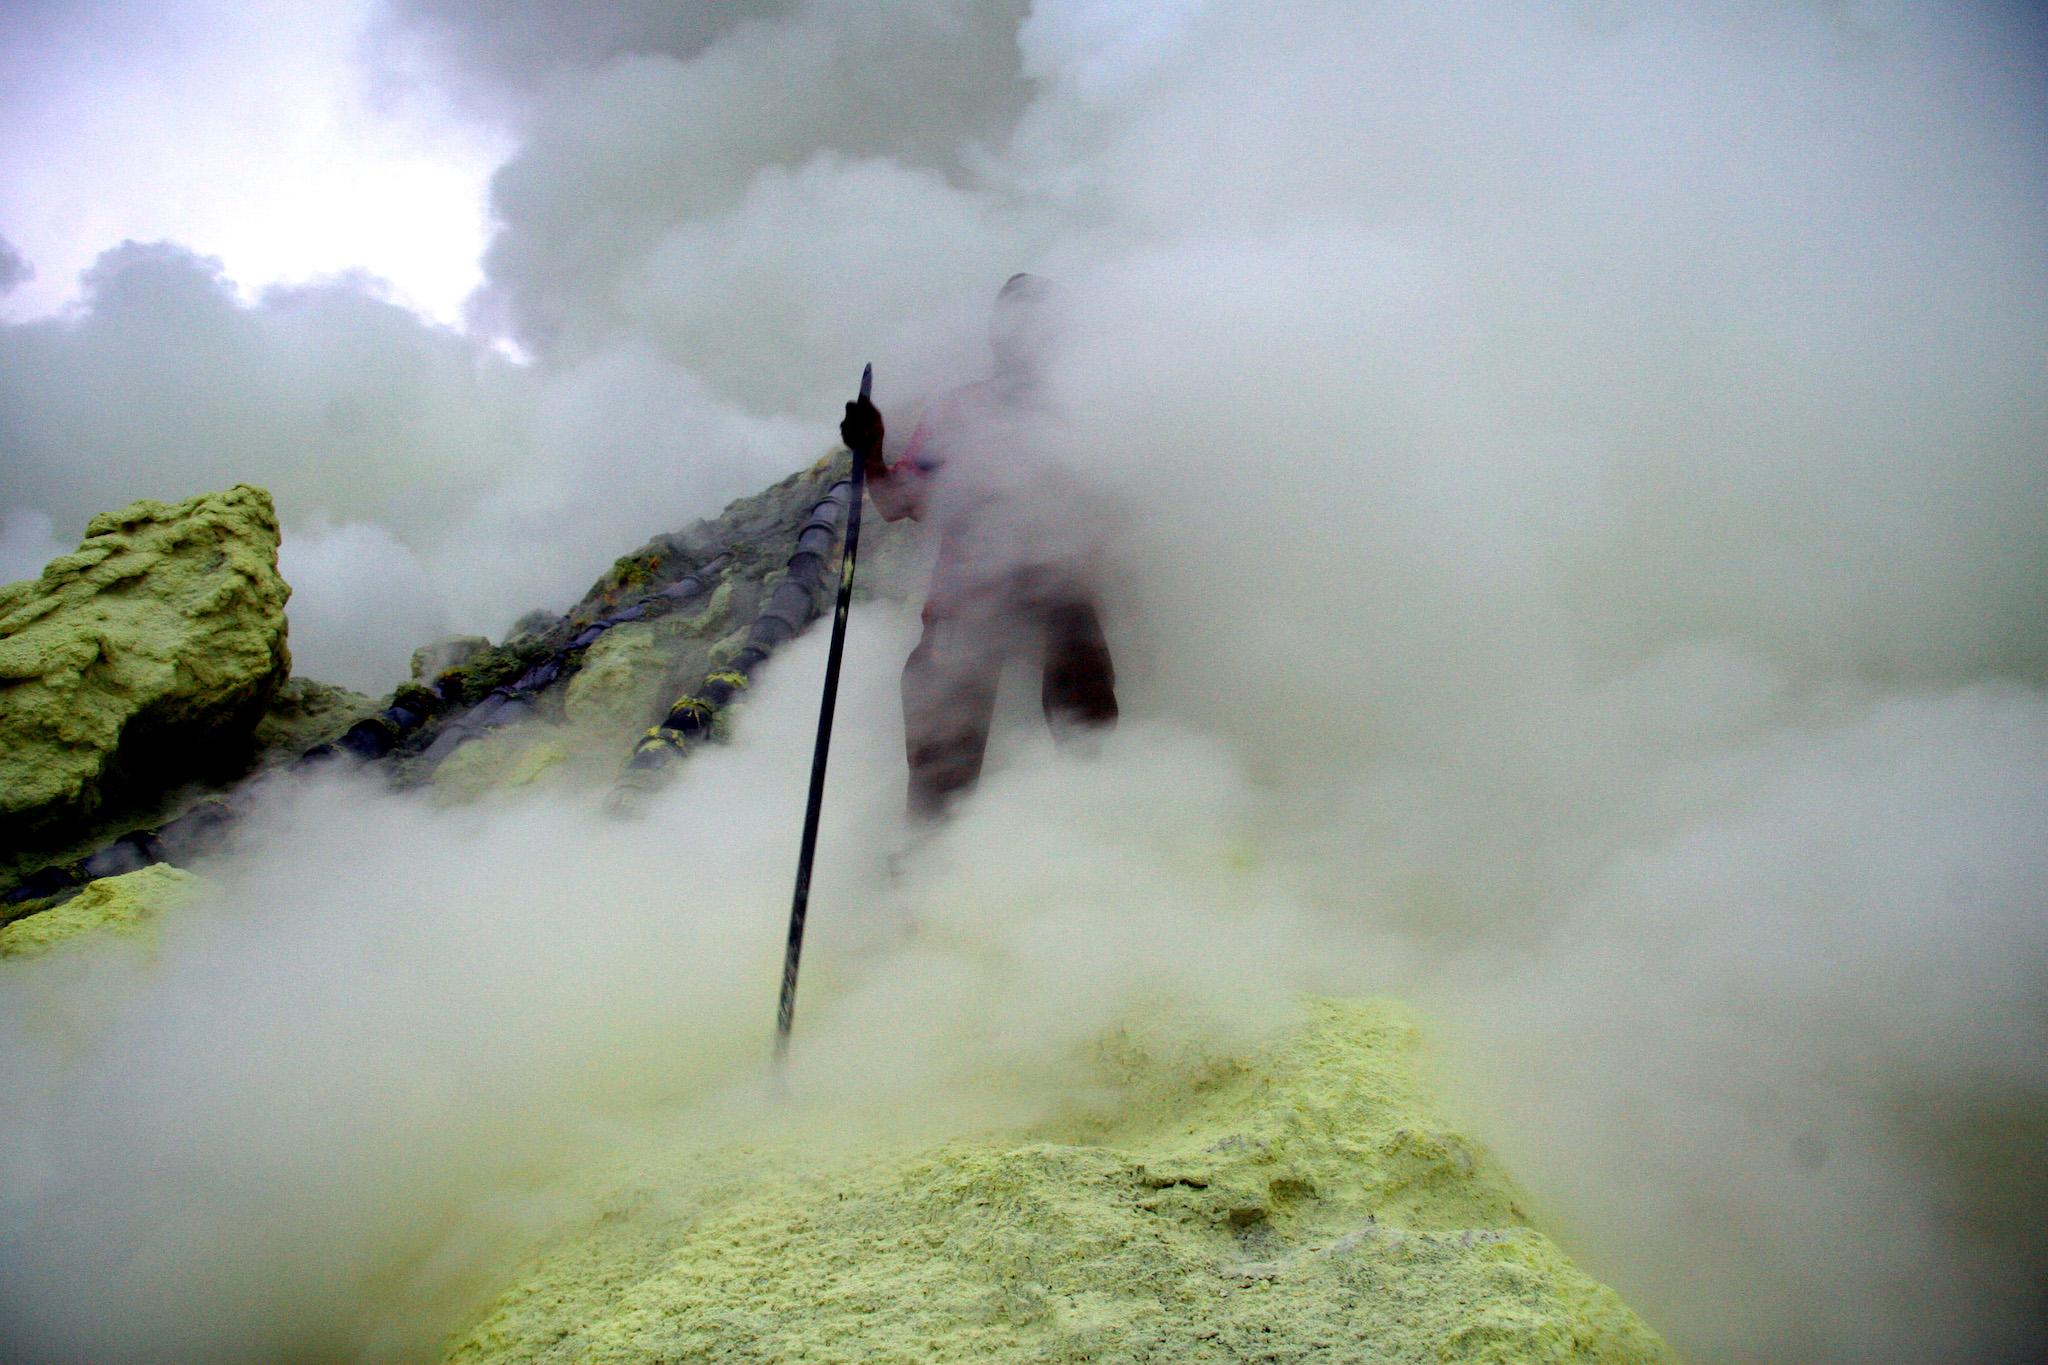 An Indonesian sulphur miner collects sulphur from the crater atop the Ijen volcano in Banyuwangi, on East Java